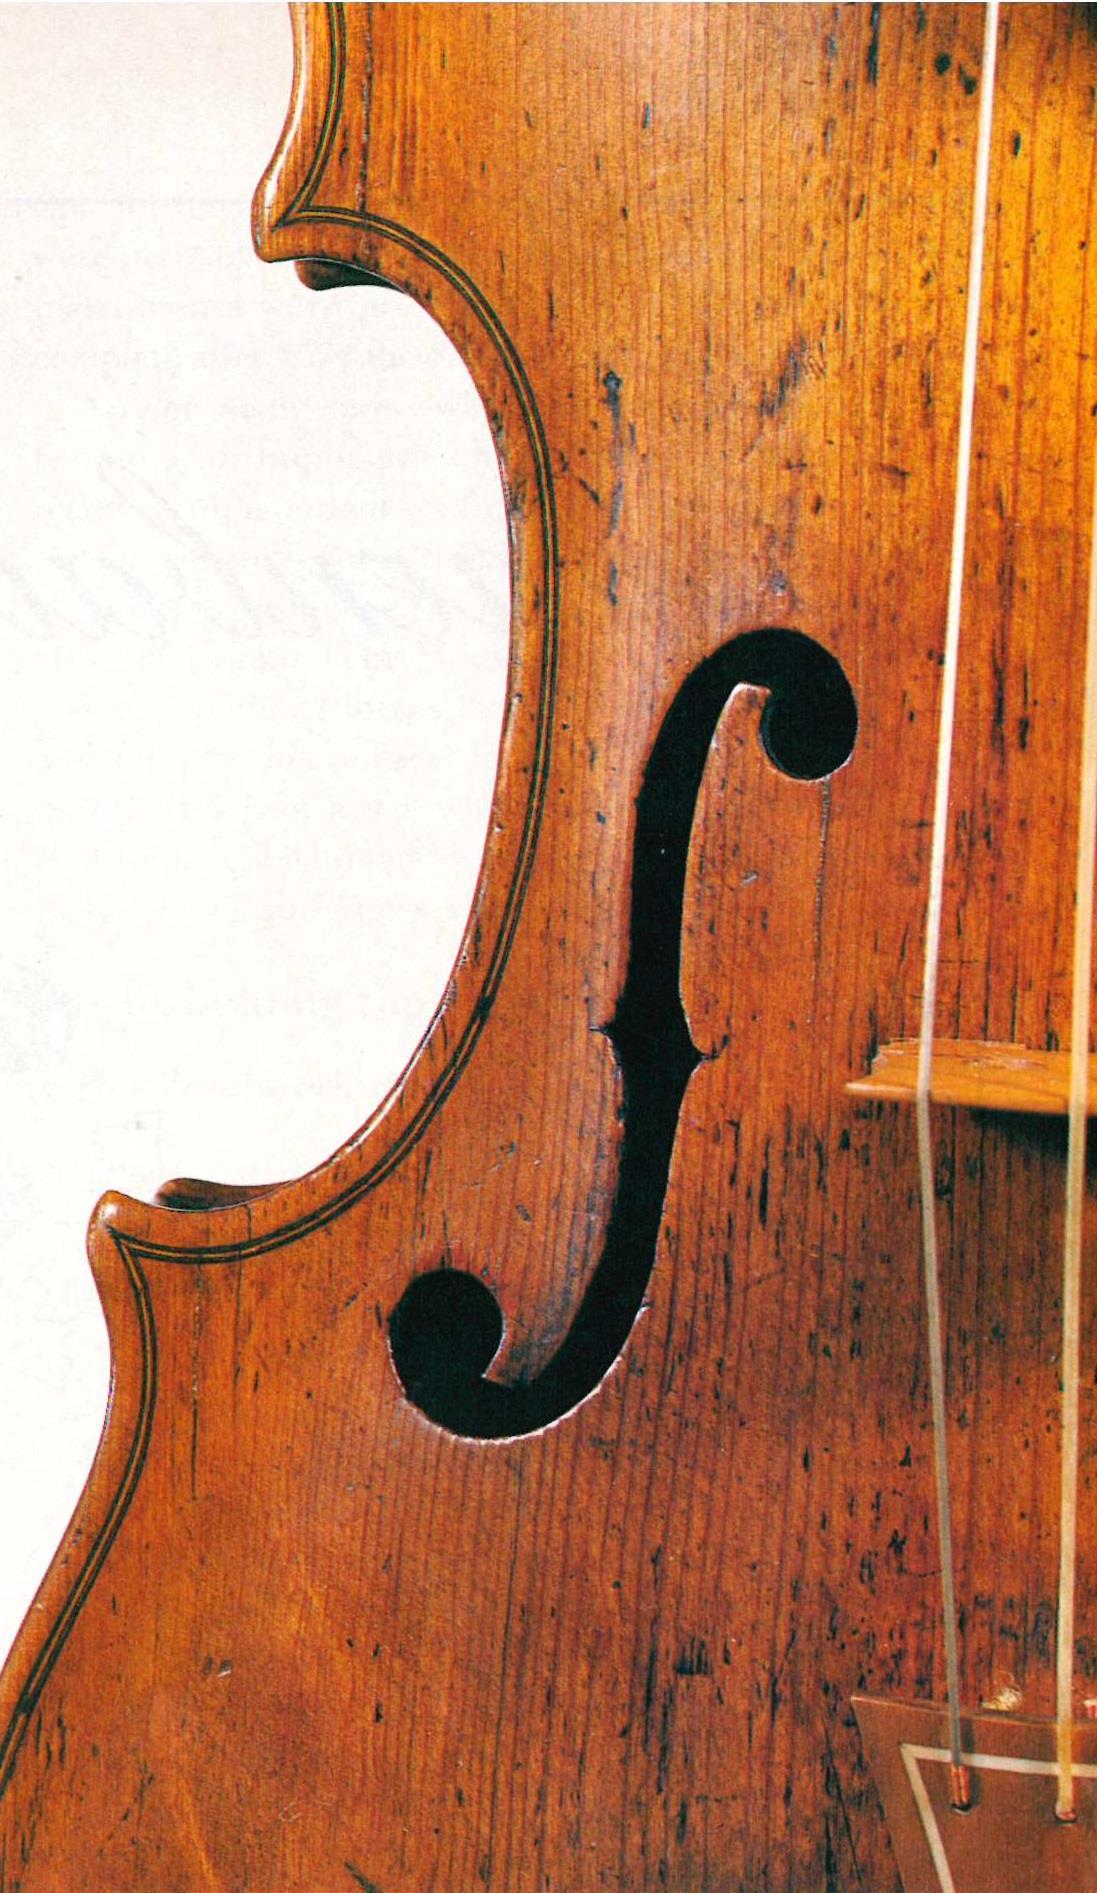 From the Archive: Andrea Amati, 1564 'Charles IX' violin from the